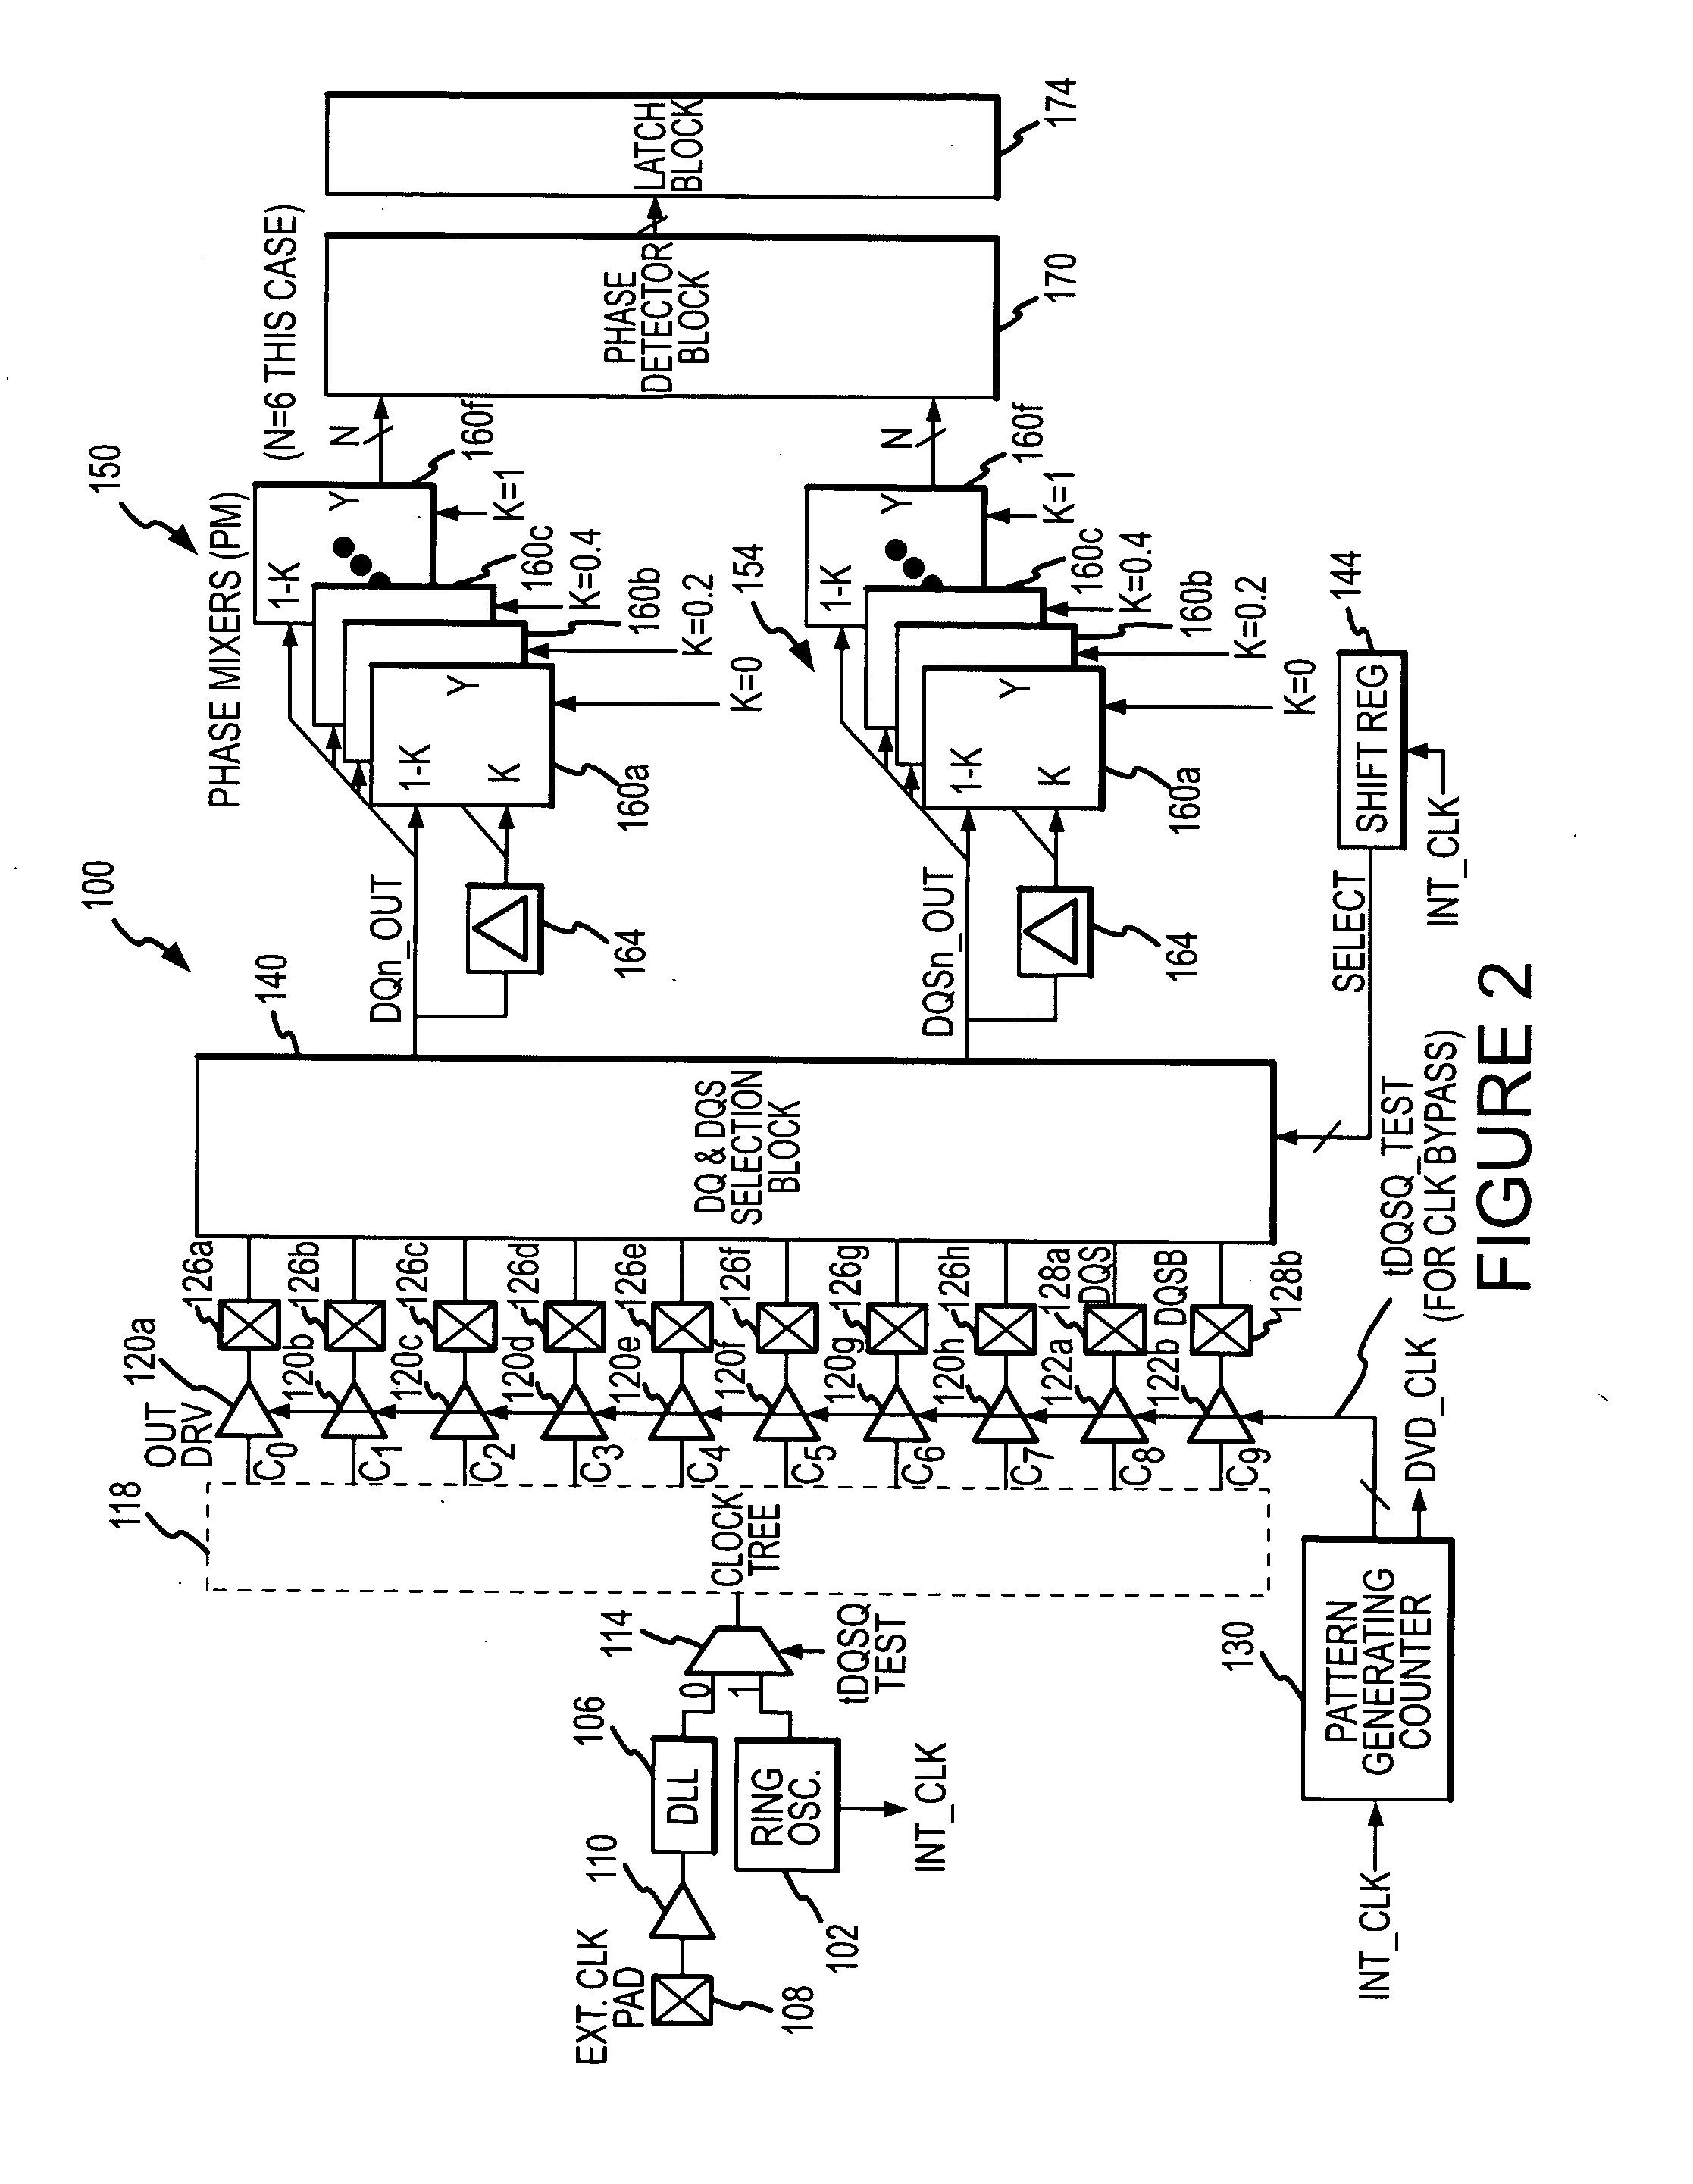 Built-in system and method for testing integrated circuit timing parameters